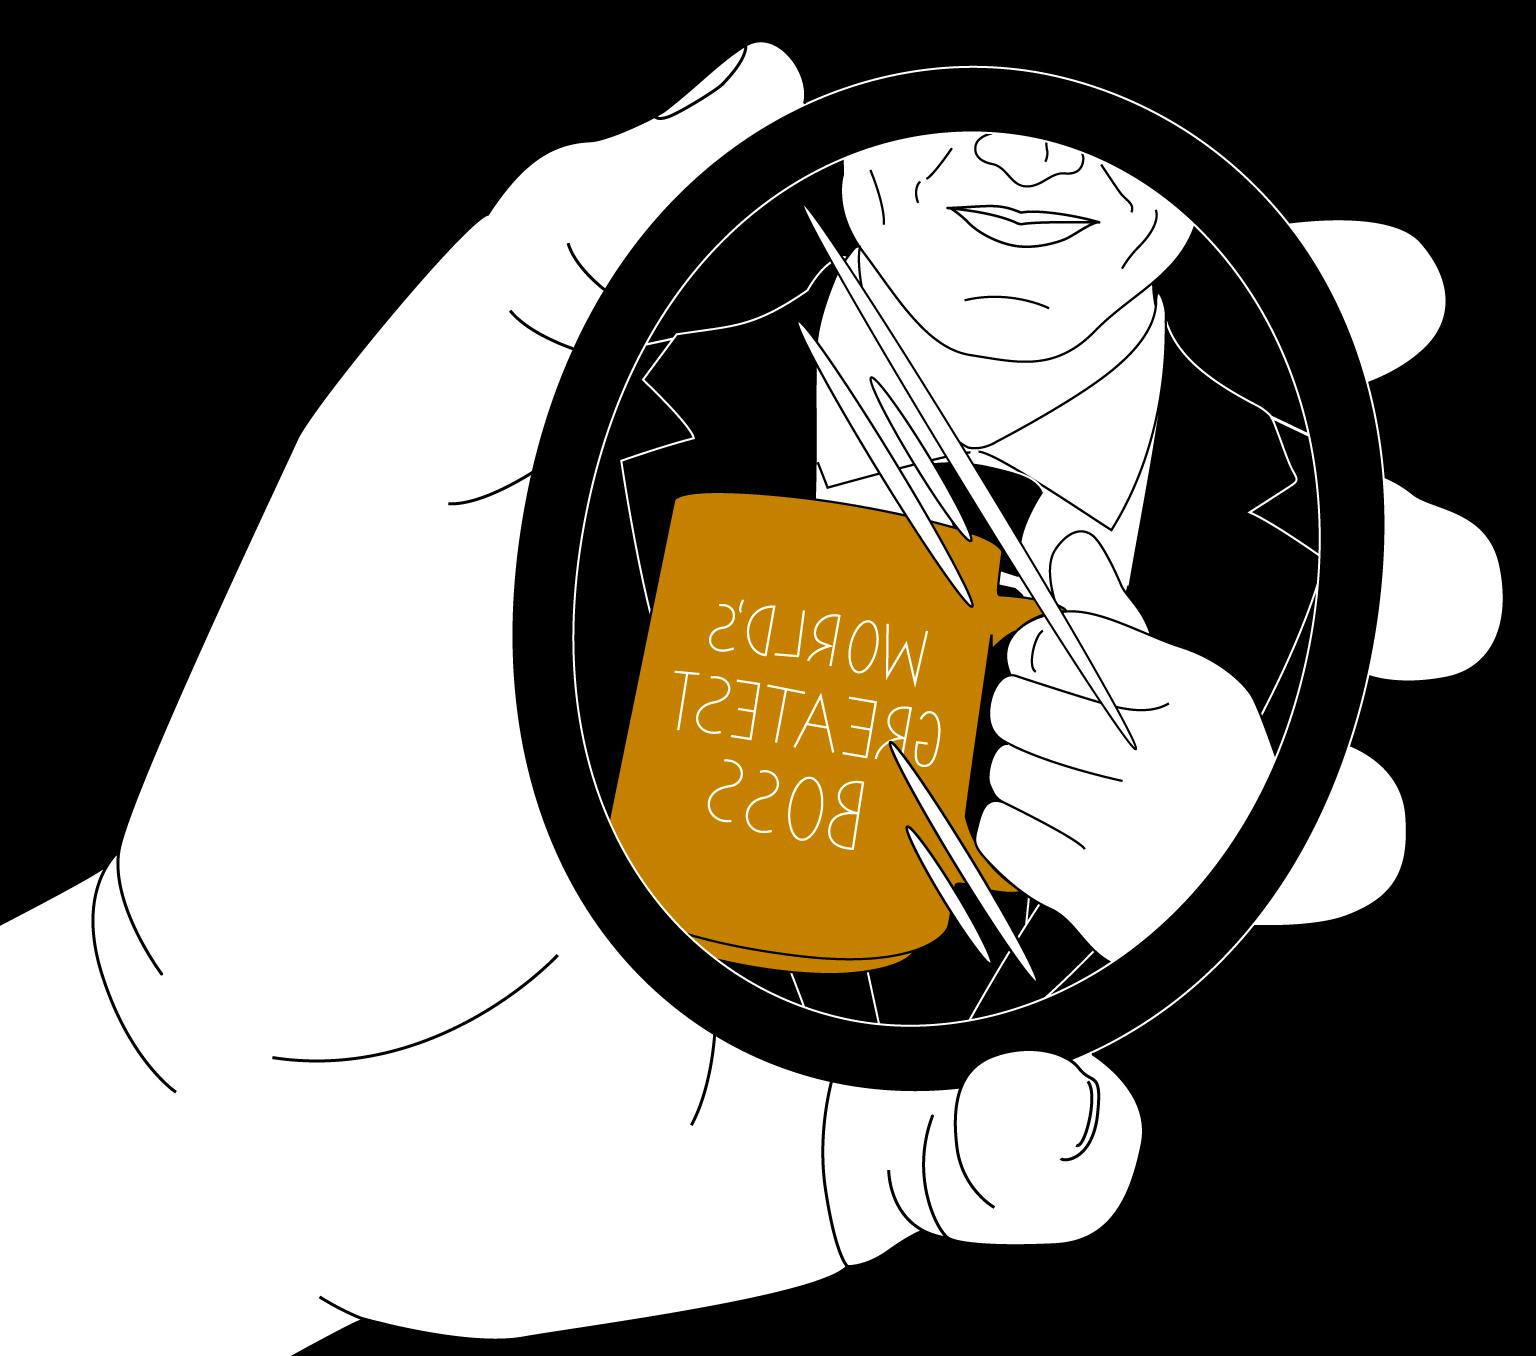 Illustration of a boss looking at themselves in a handheld mirror, holding a mug saying 'World's Greatest Boss'